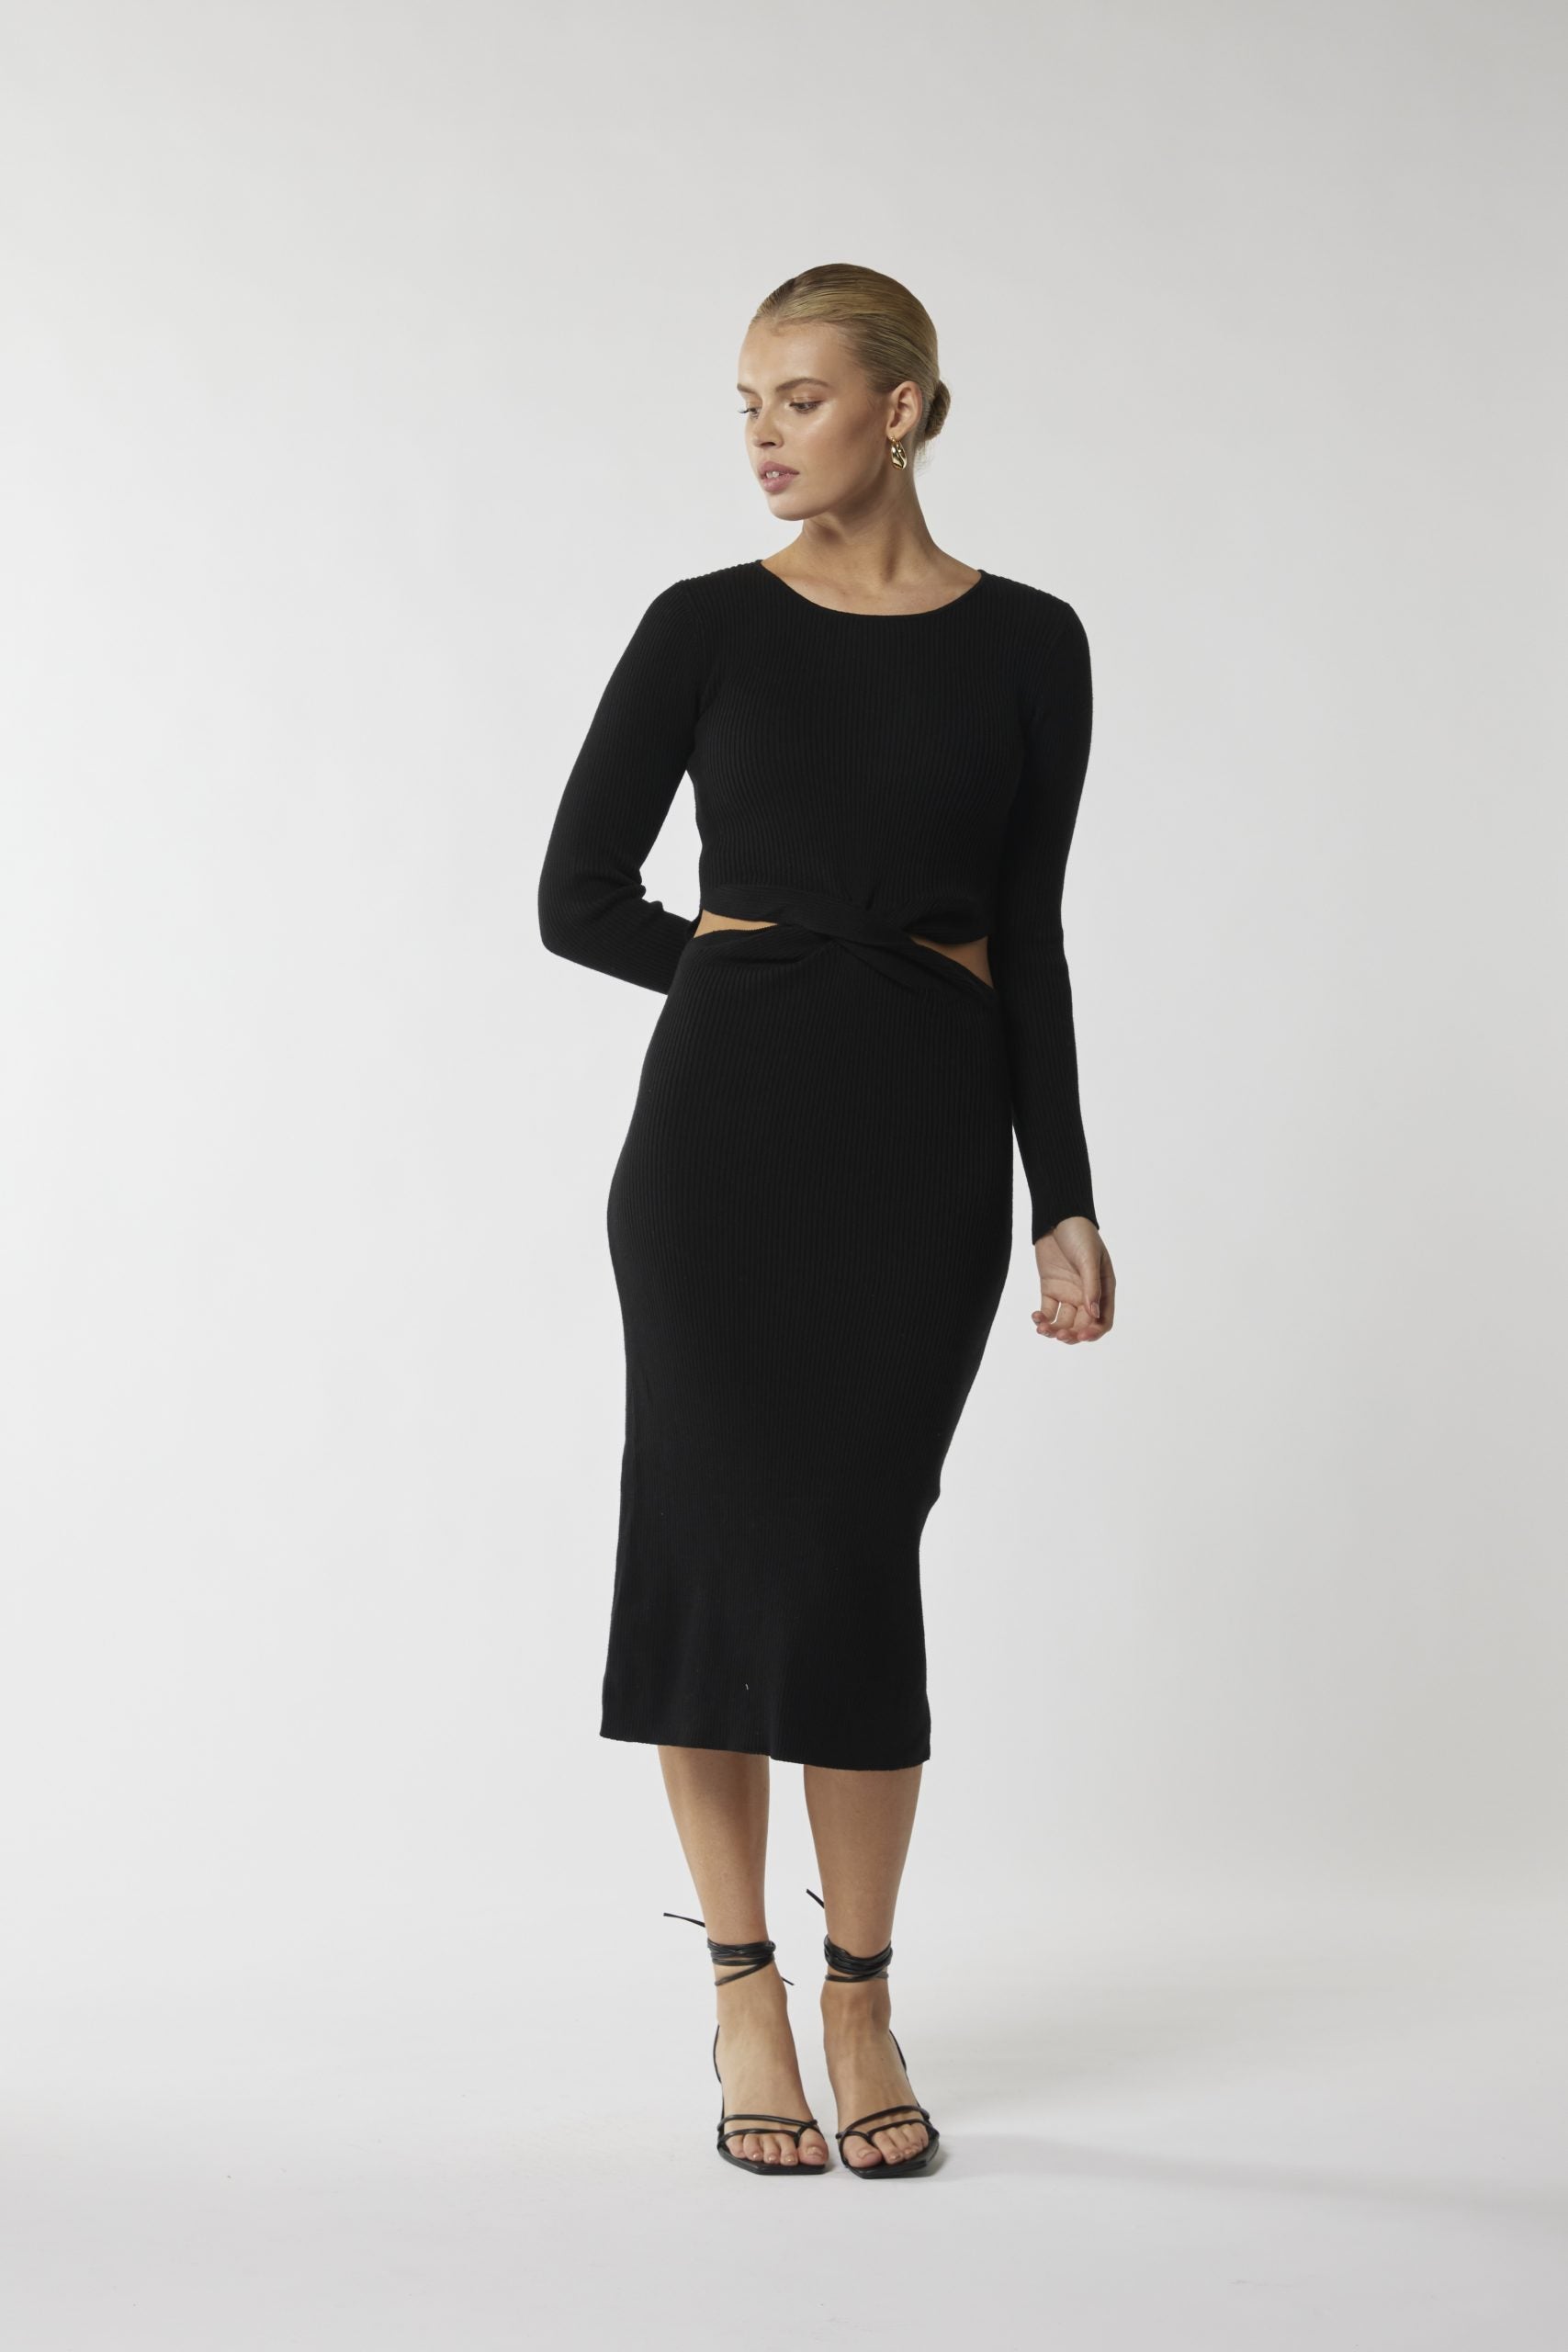 "Embrace timeless style with our black midi dress featuring a flattering cut-out waist. Shop now!"